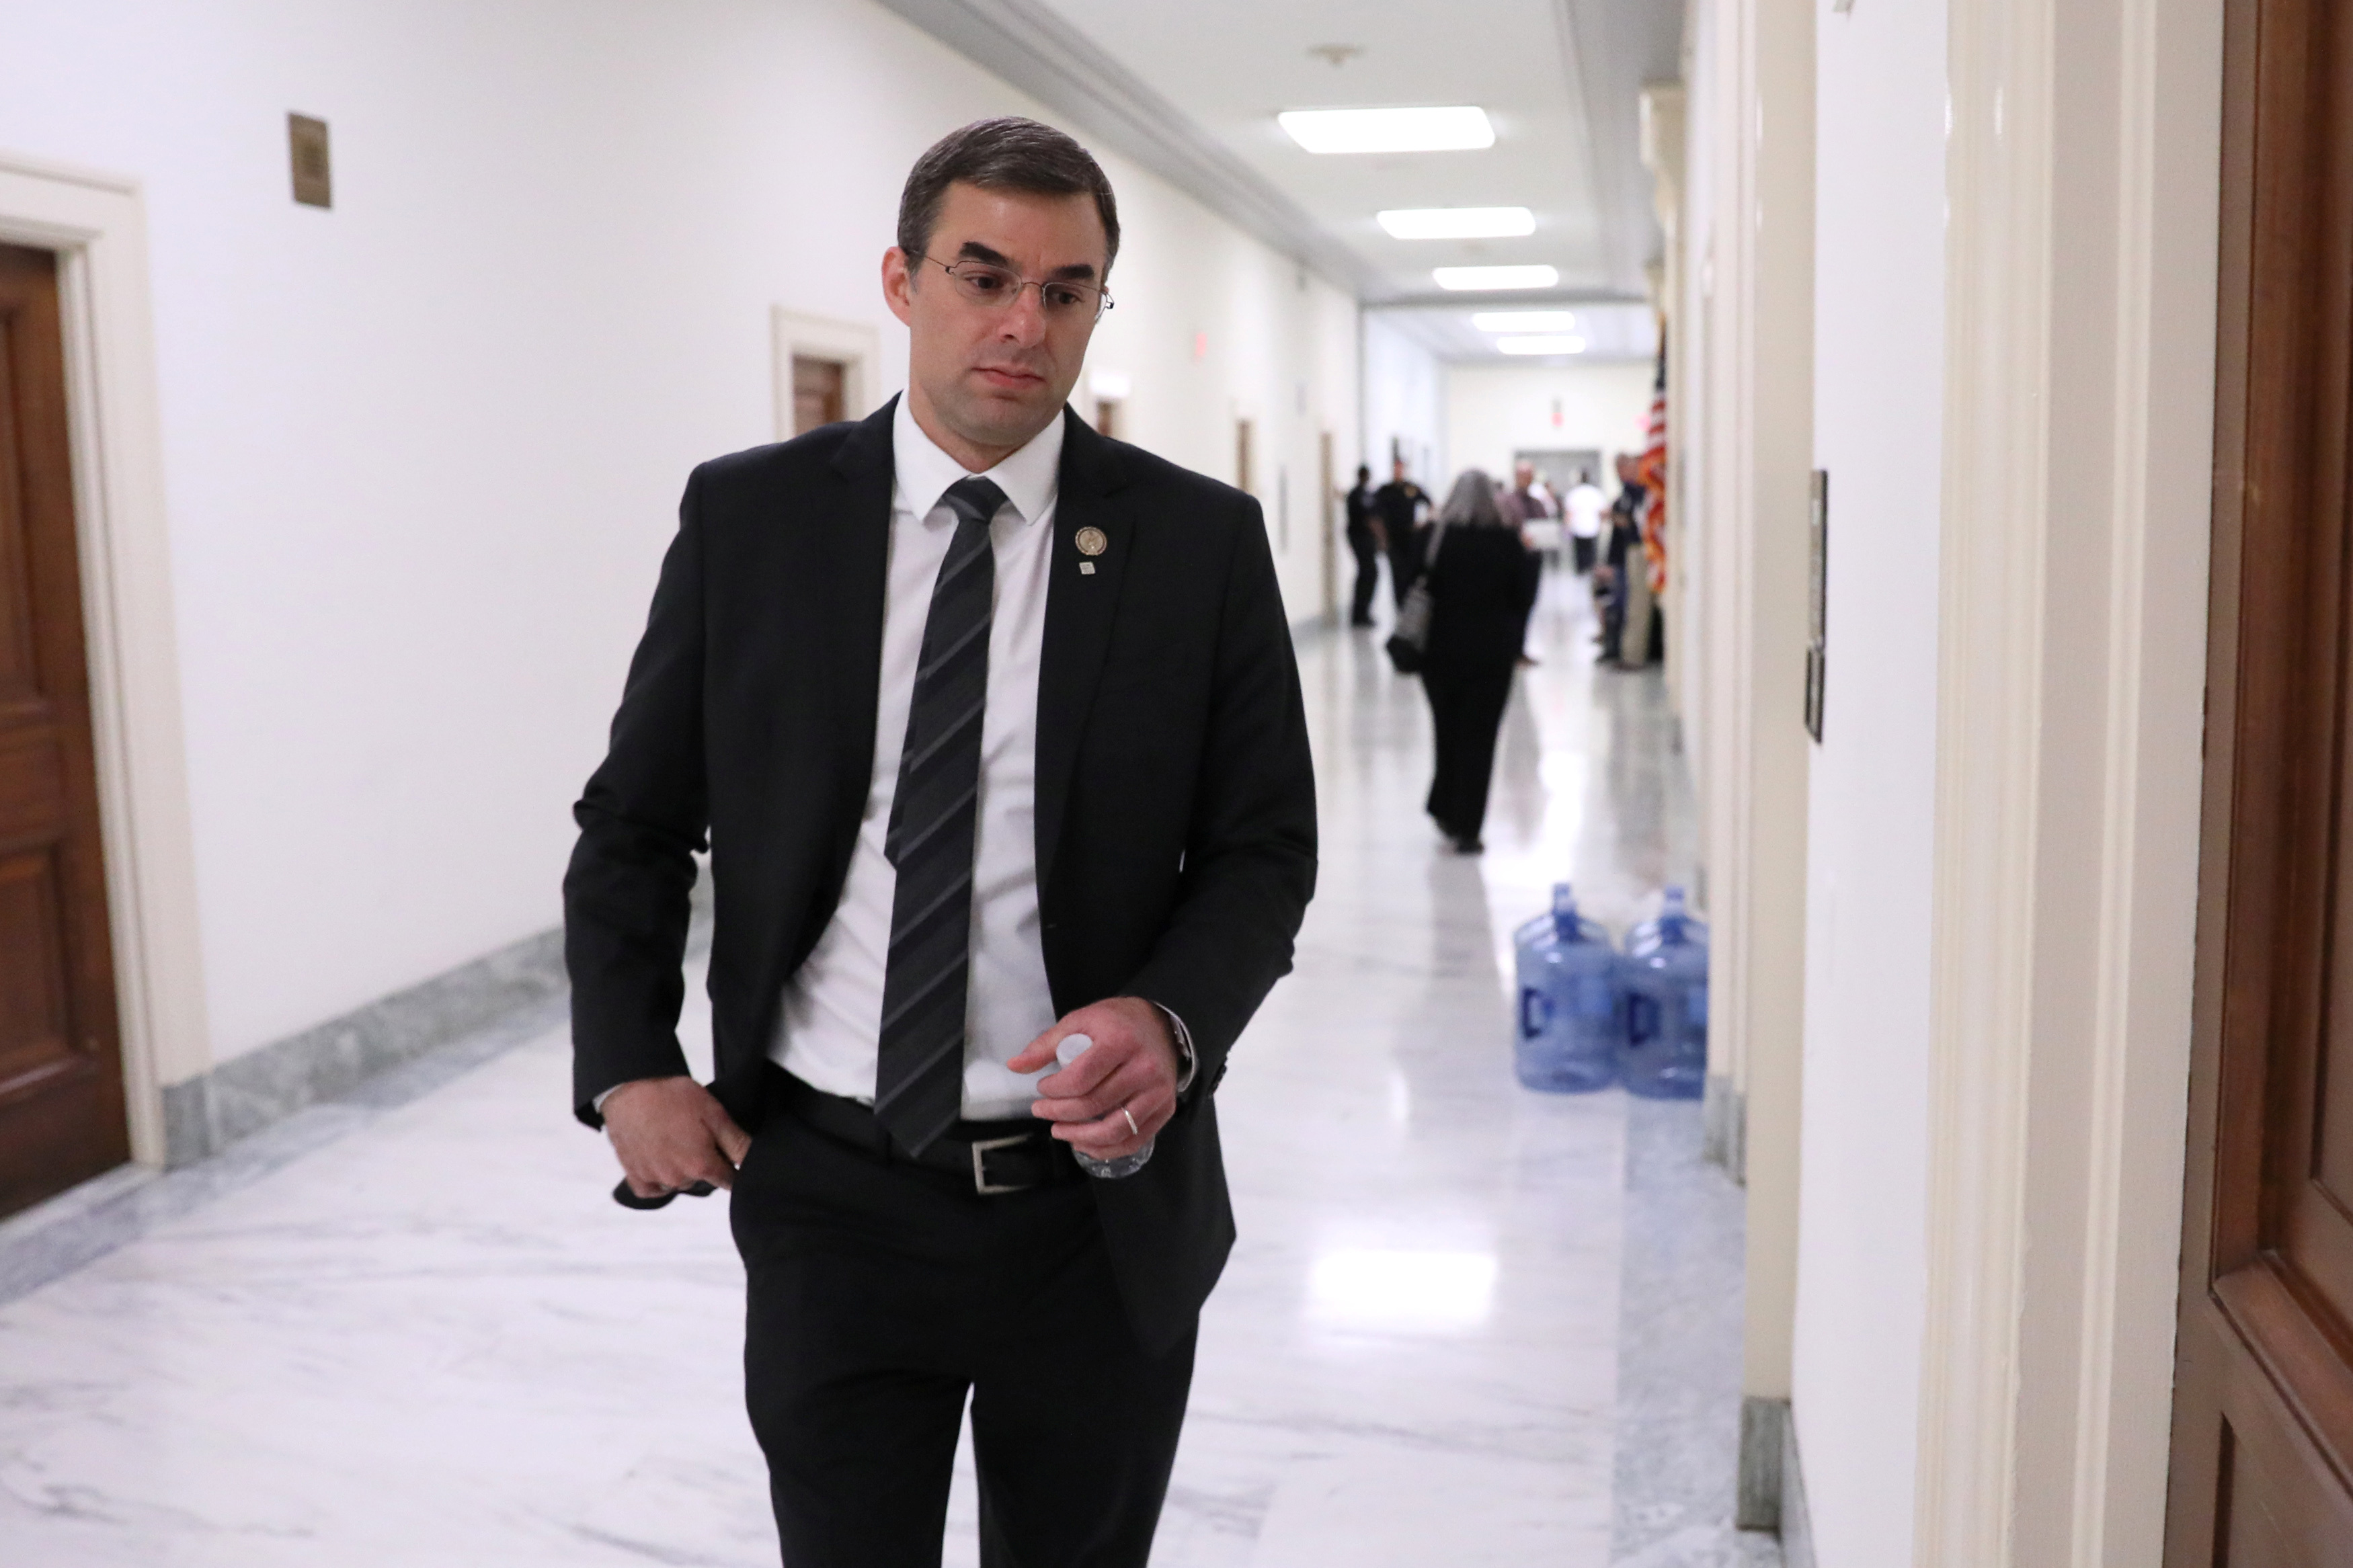 U.S. Representative Justin Amash, who recently tweeted his view that the Mueller report on Russia showed that President Trump had obstructed justice, arrives for a House Oversight Committee Hearing on Capitol Hill in Washington, U.S. May 22, 2019. REUTERS/Jonathan Ernst